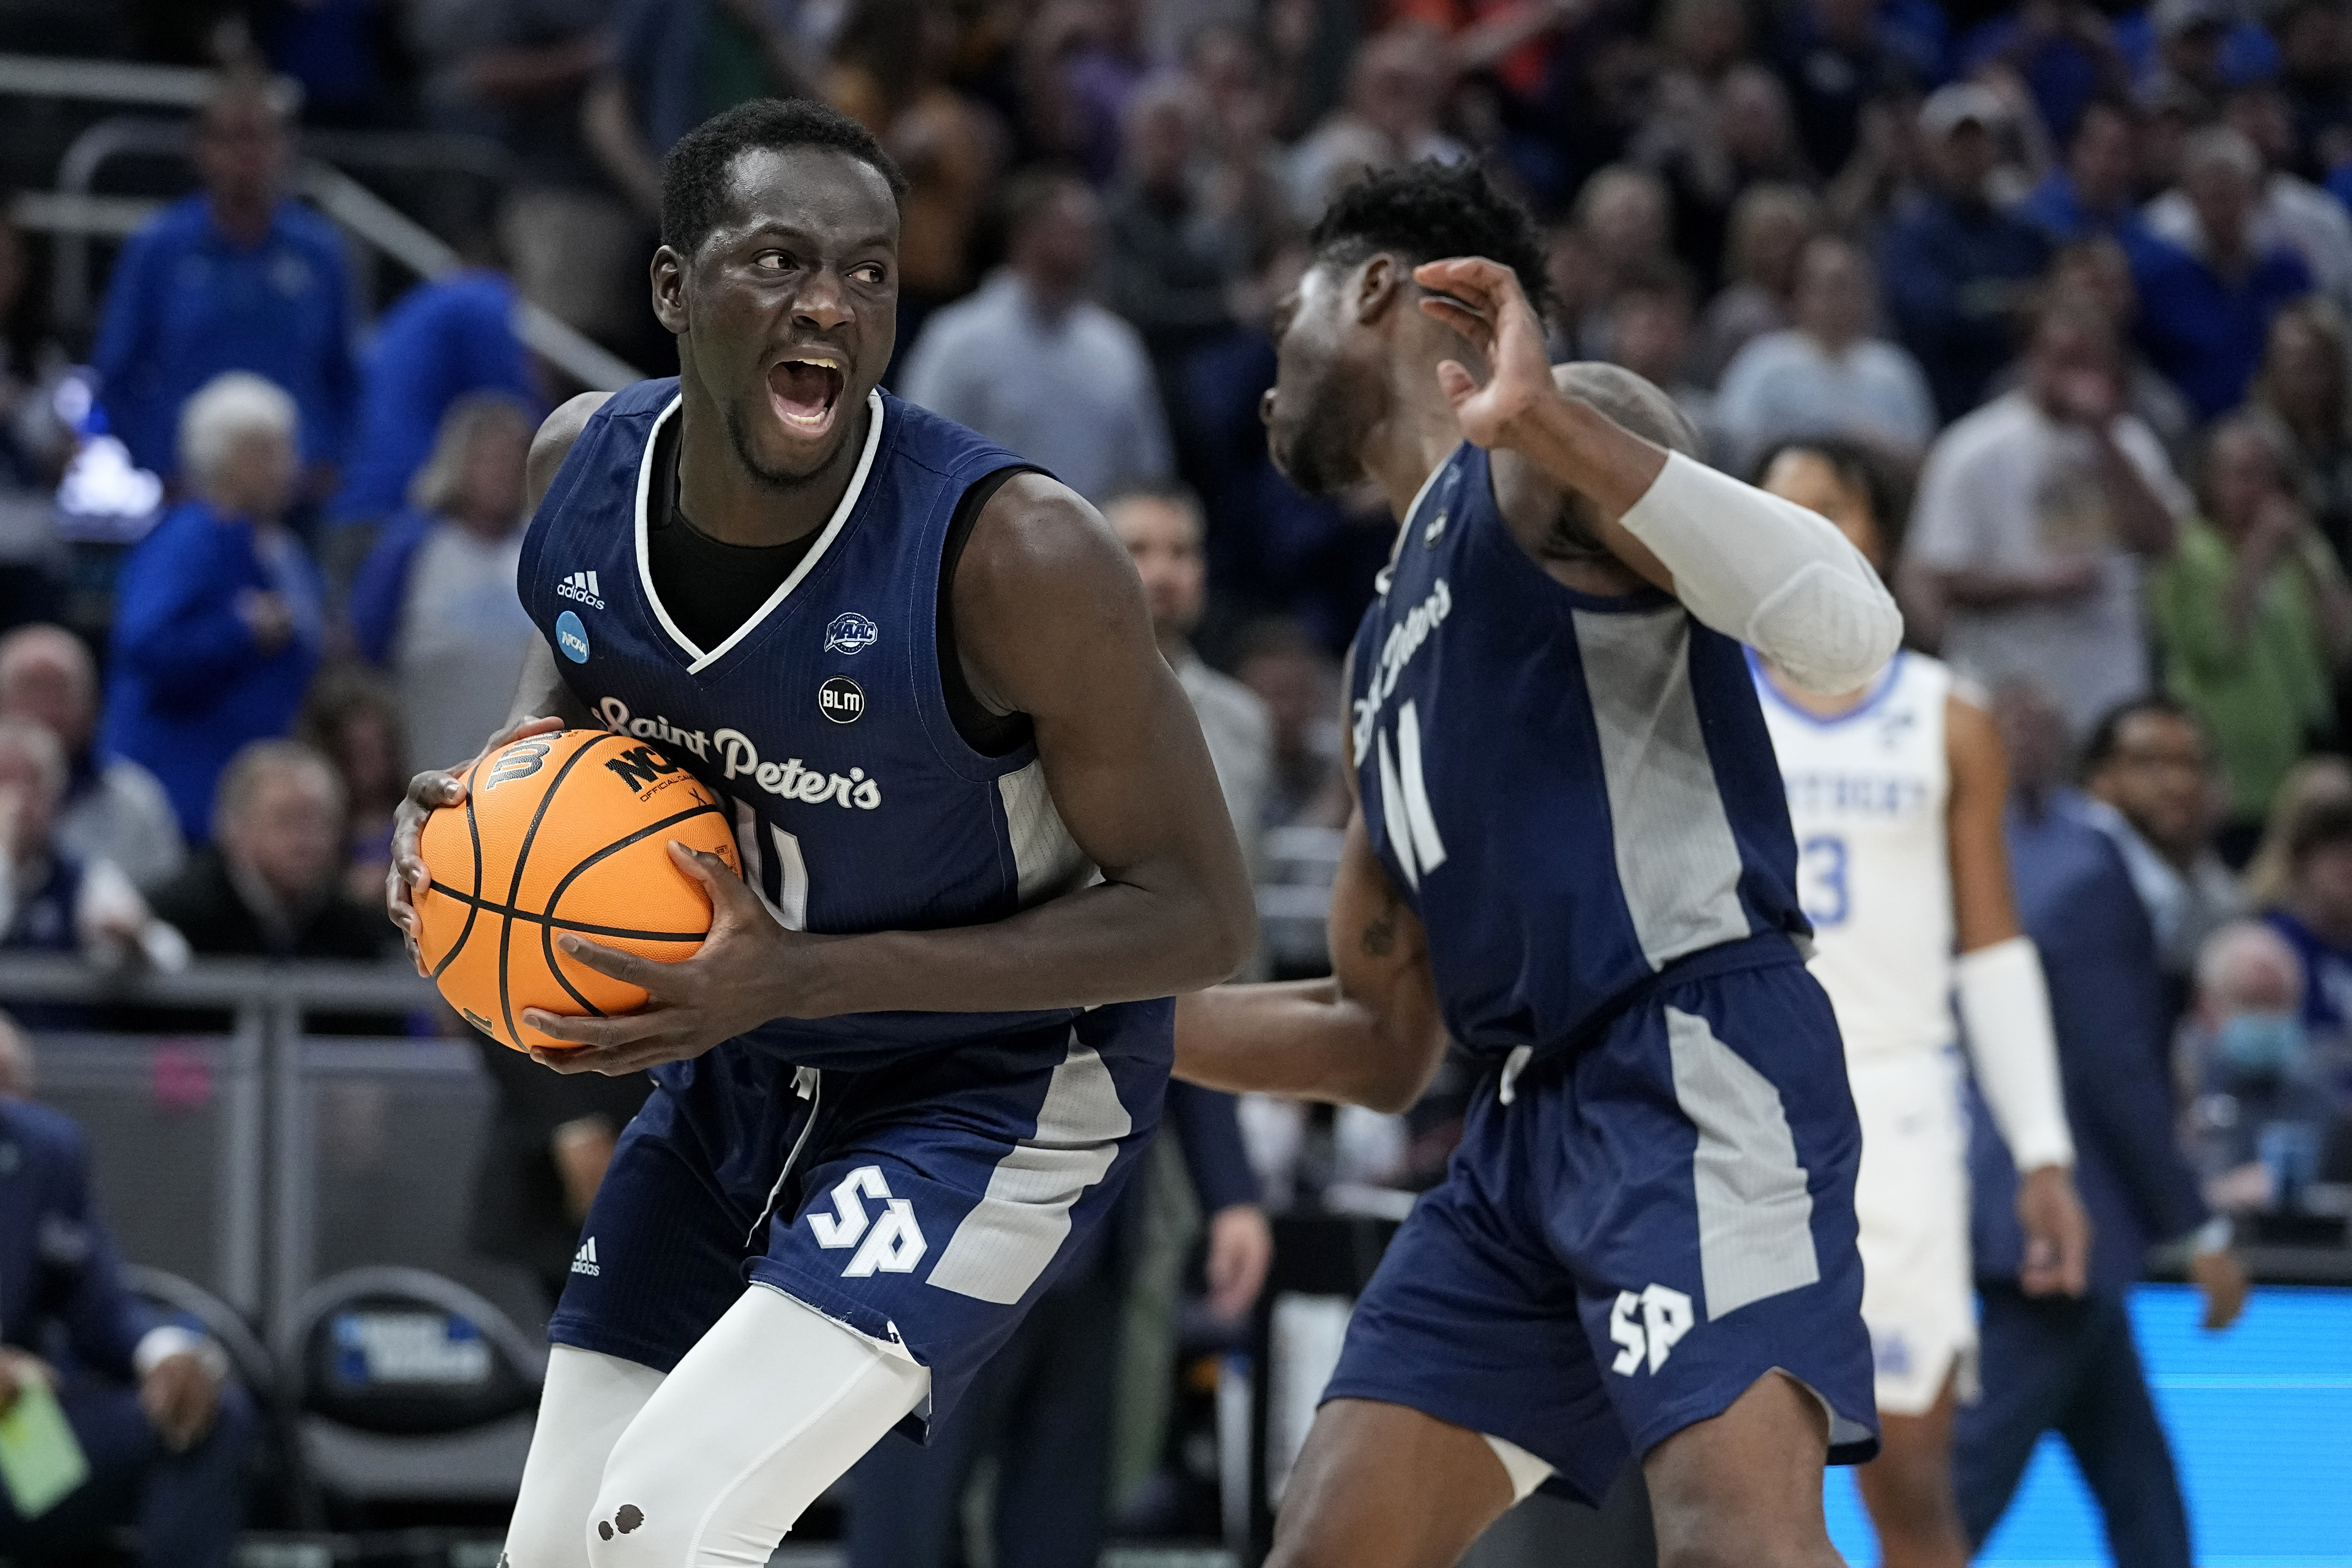 How to watch NCAA Tournament Second Round Free live stream, TV channel, schedule for all 16 games